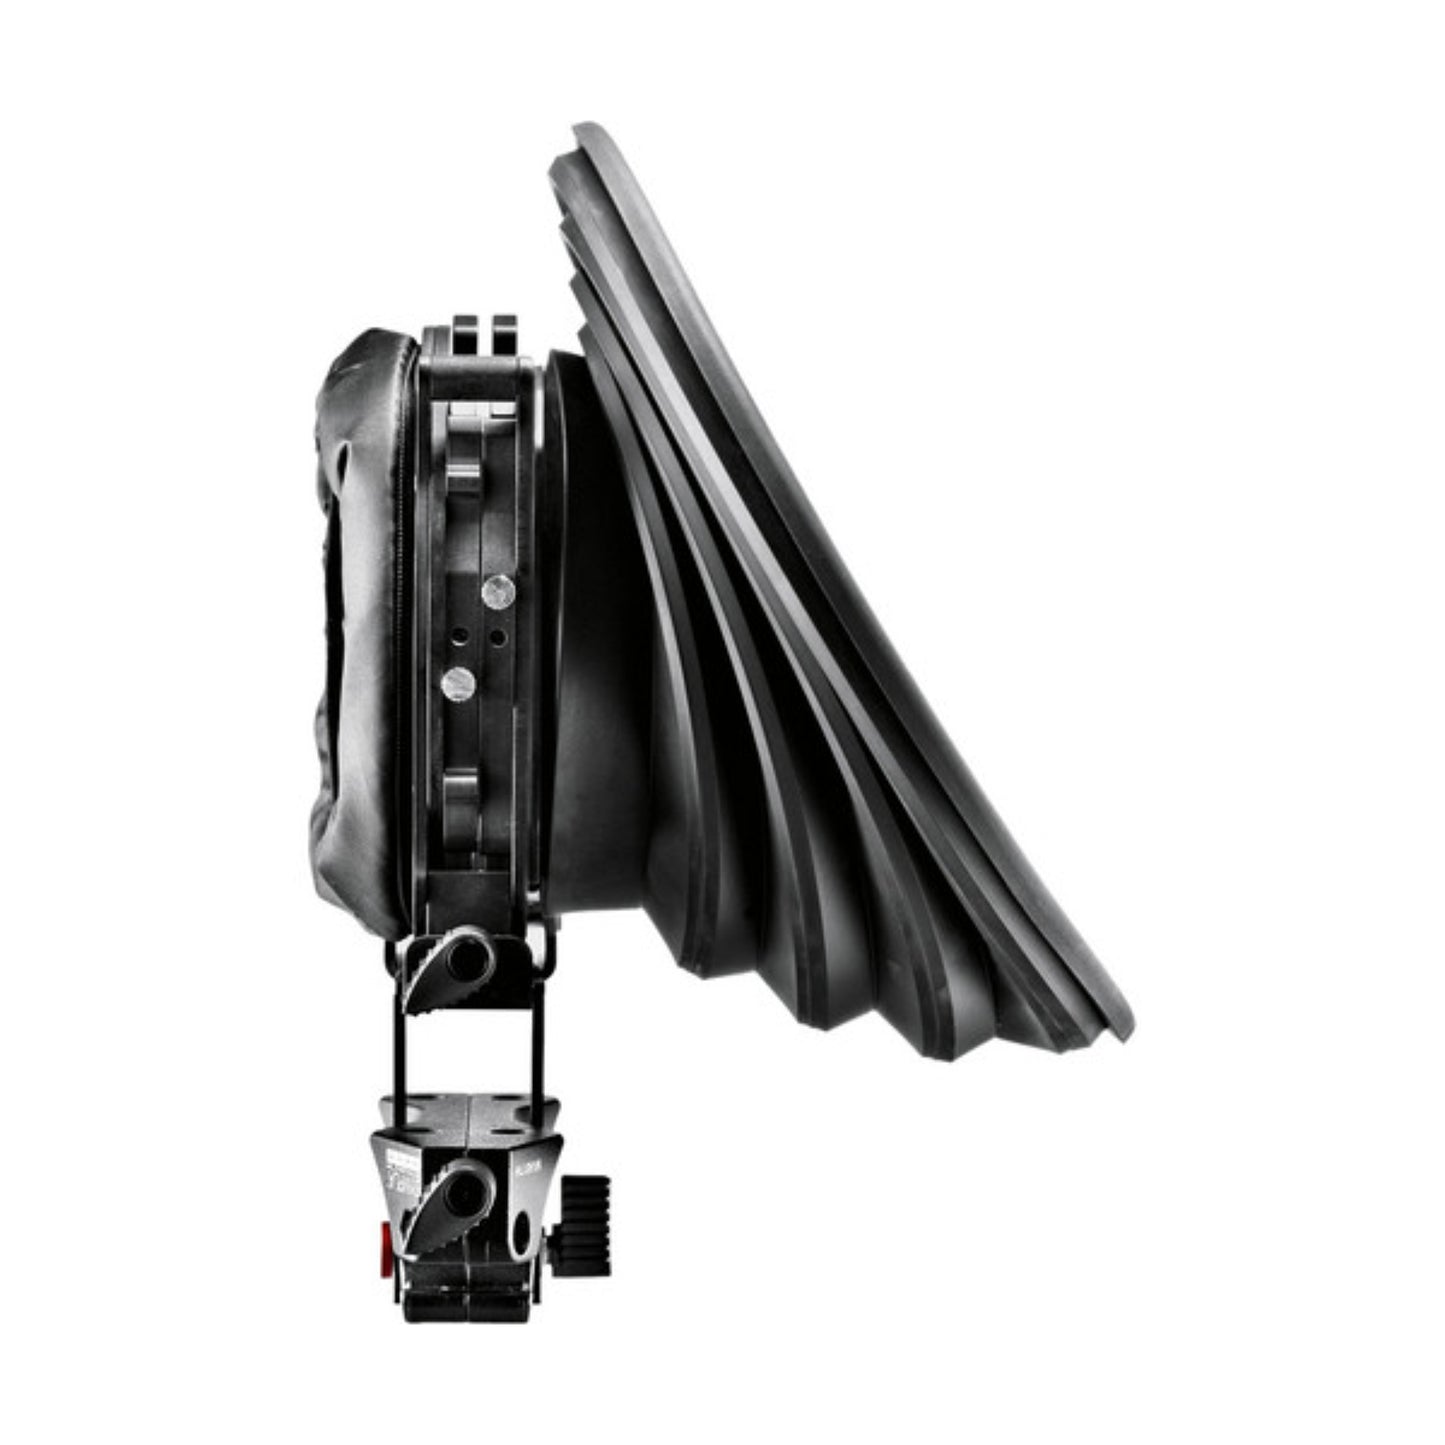 Buy Manfrotto SYMPLA Flexible Mattebox | Topic Store